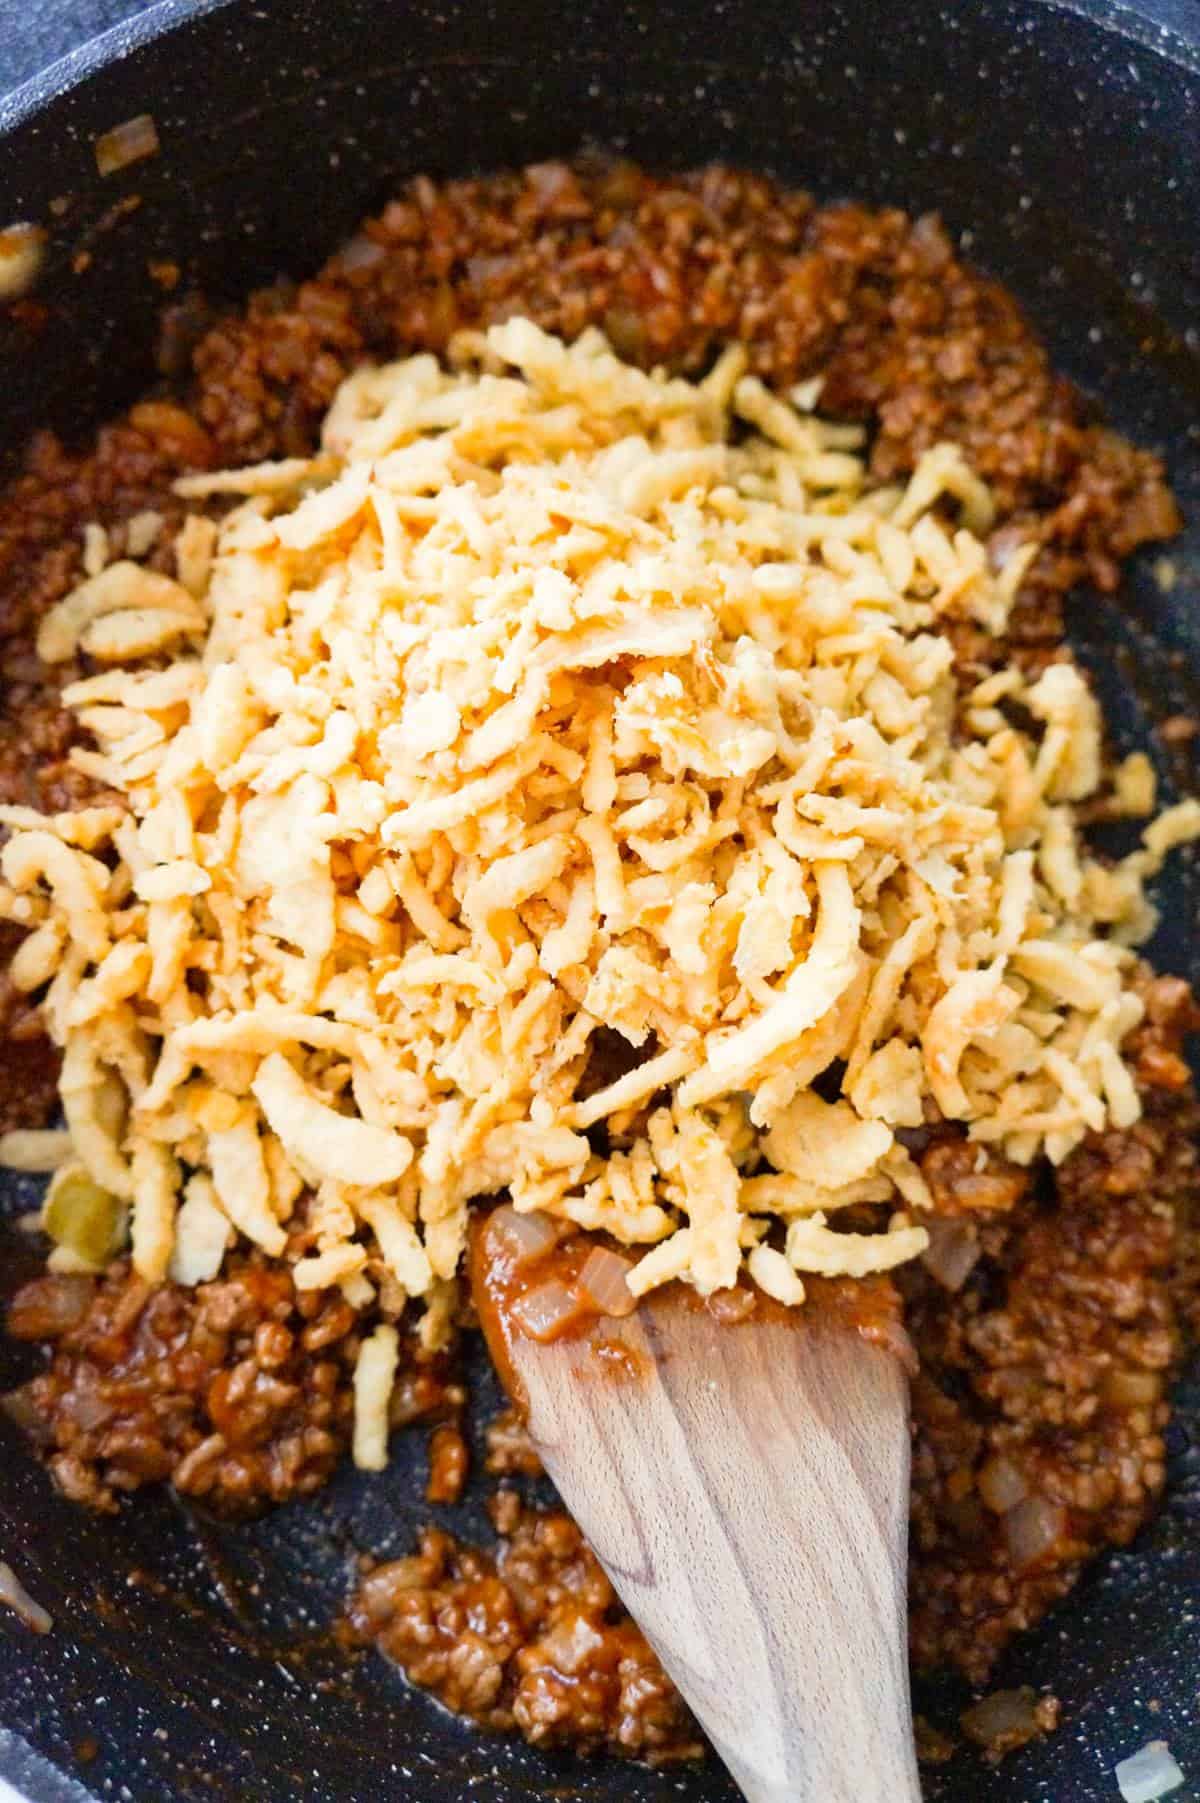 French's crispy fried onions on top of ground beef sloppy joe mixture in a saute pan